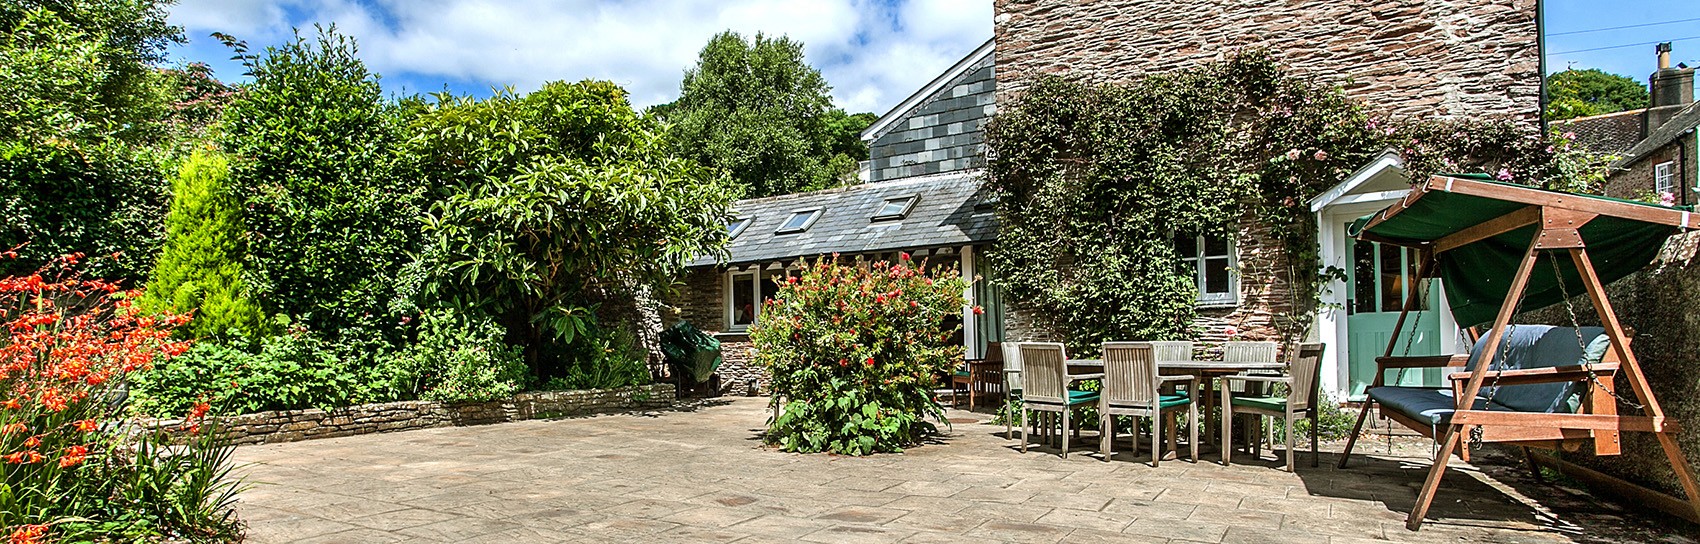 Courtyard at Rill House holiday accommodation. Photograph by RILL HOUSE